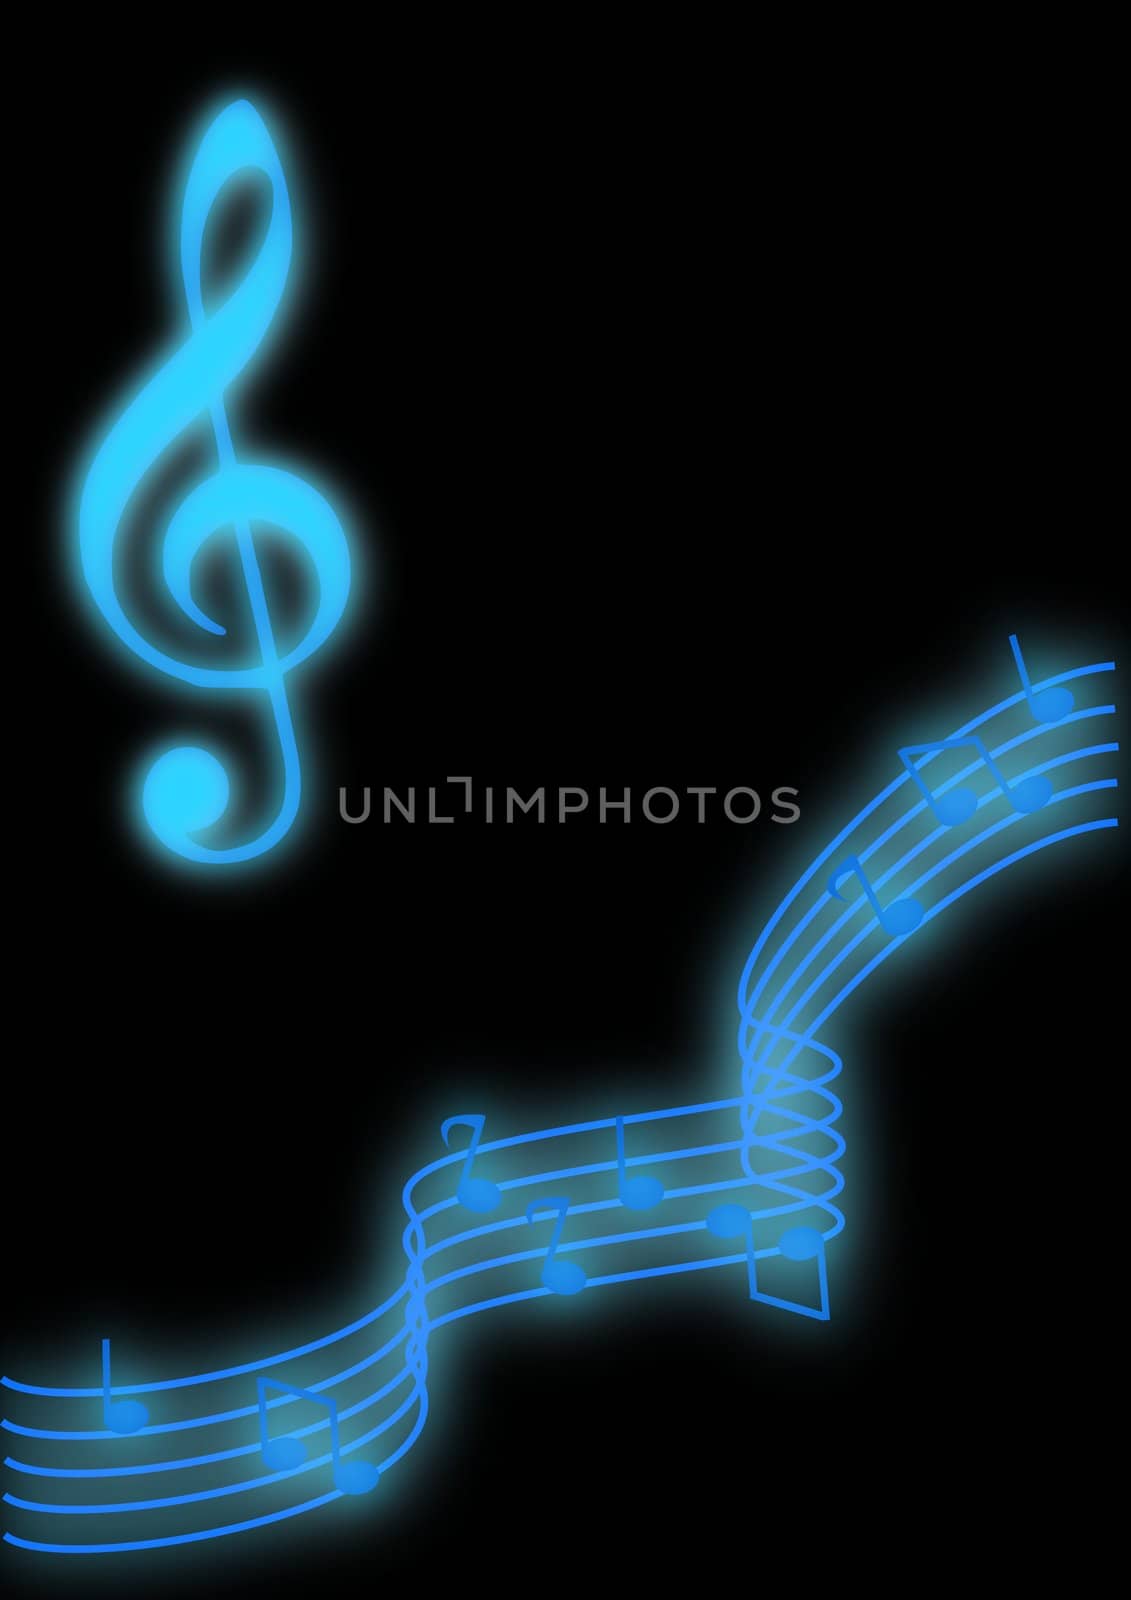 Glowing blue music notes on a black background.